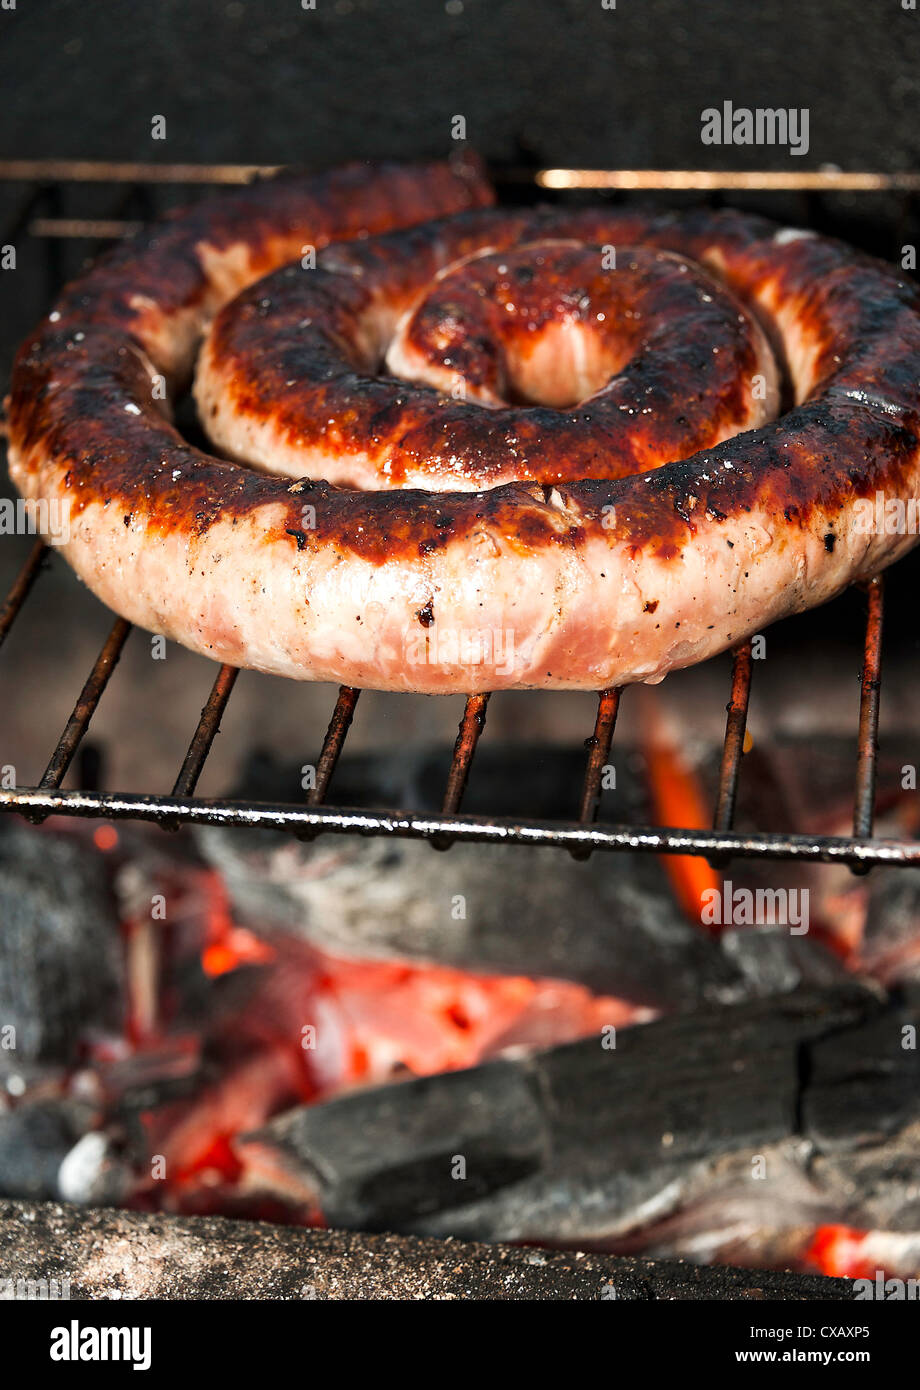 French Pork Sausage Cooking on a Charcoal Barbecue at Laval Midi-Pyrenees France Stock Photo